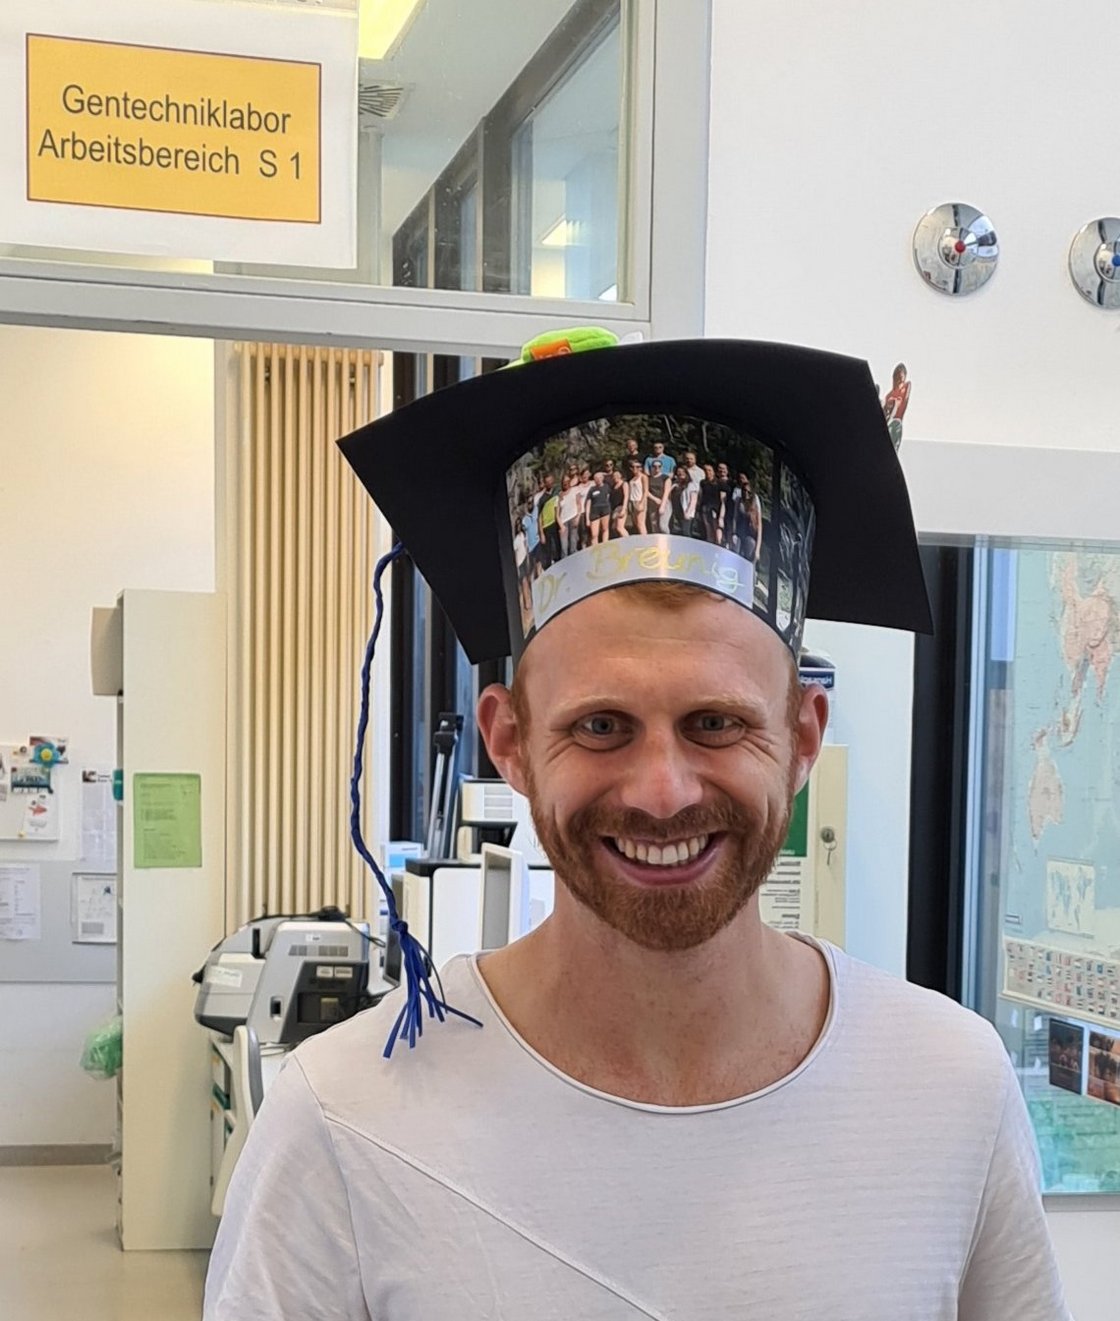 Shows Markus Breunig with his PhD hat after his defense